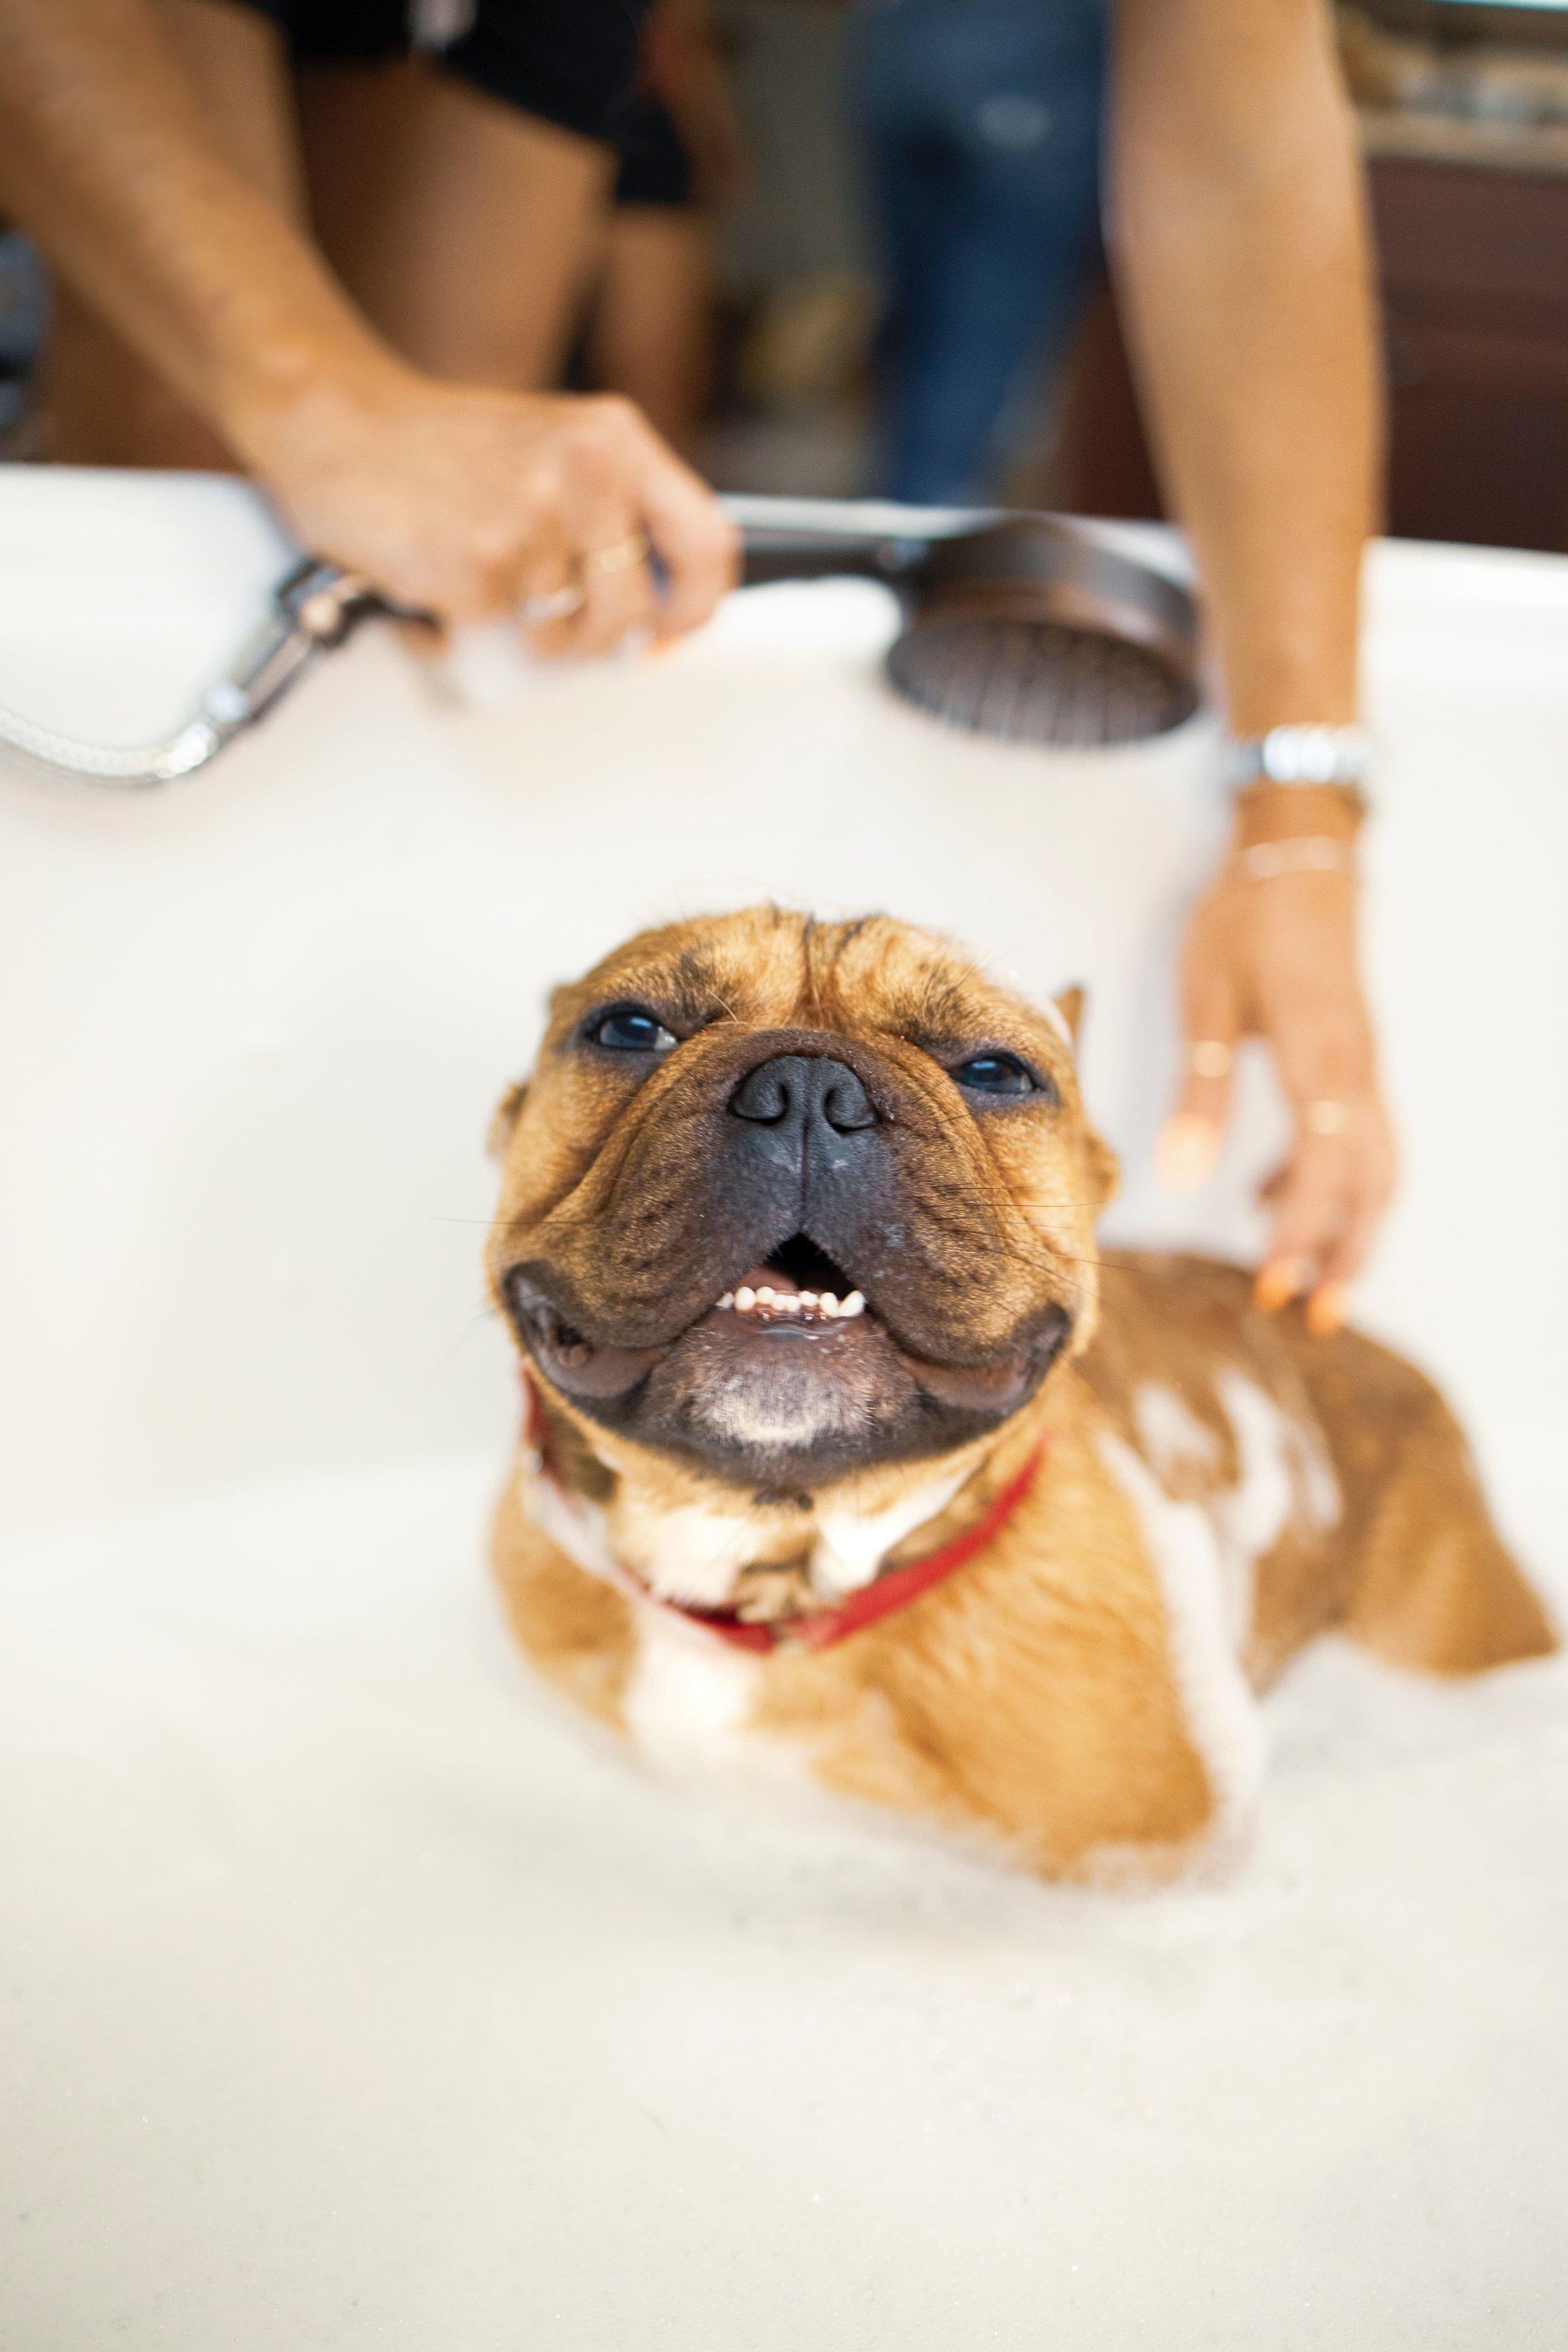 Keep your dog healthy and clean